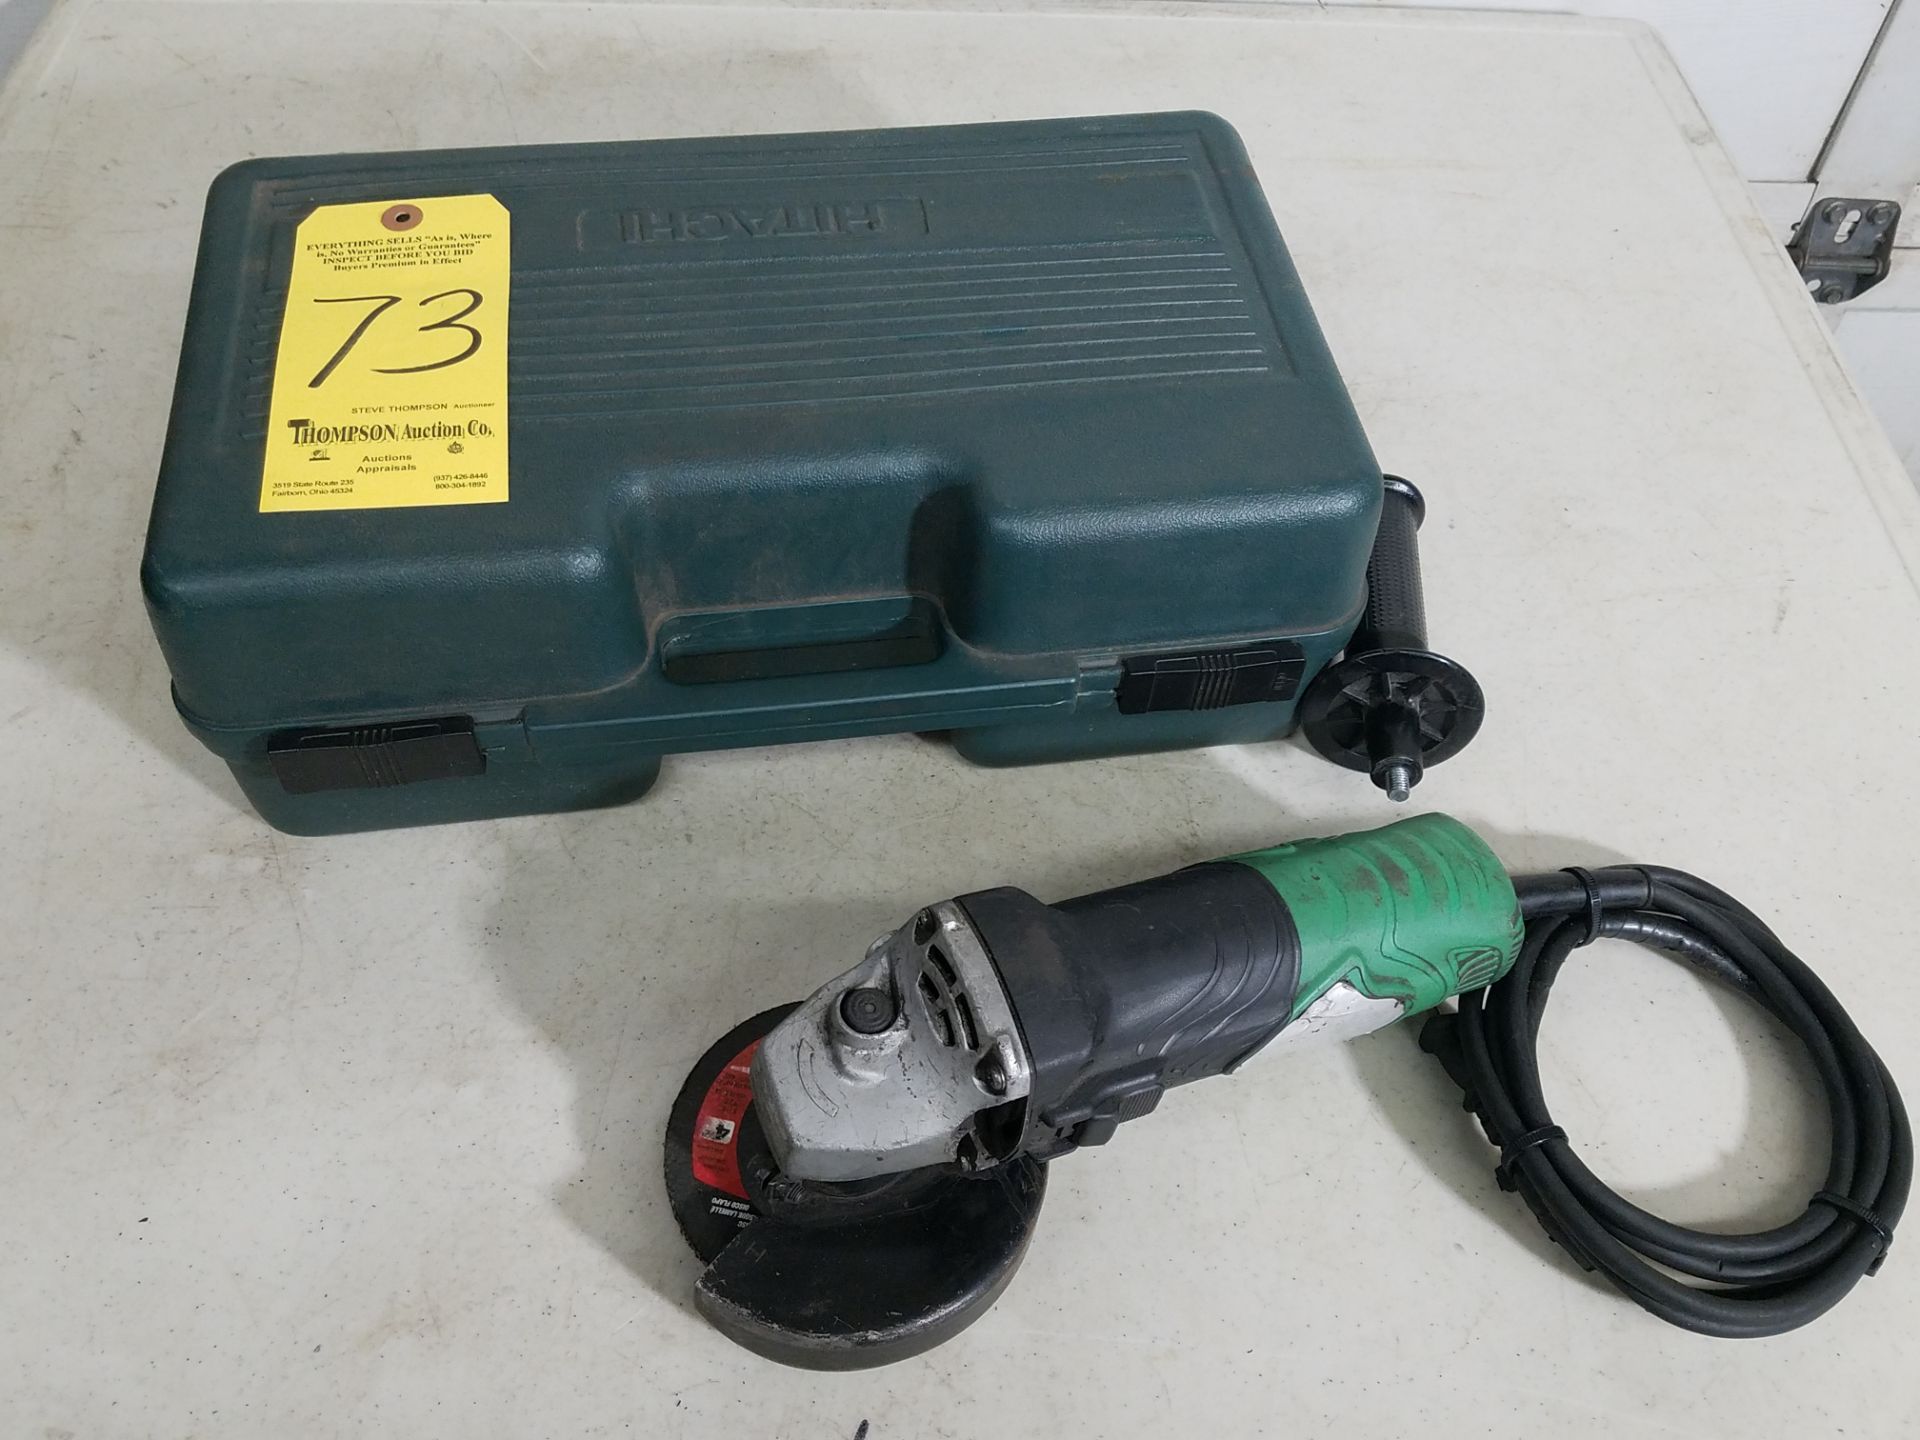 Hitachi Electric 4 1/2 In. Angle Grinder